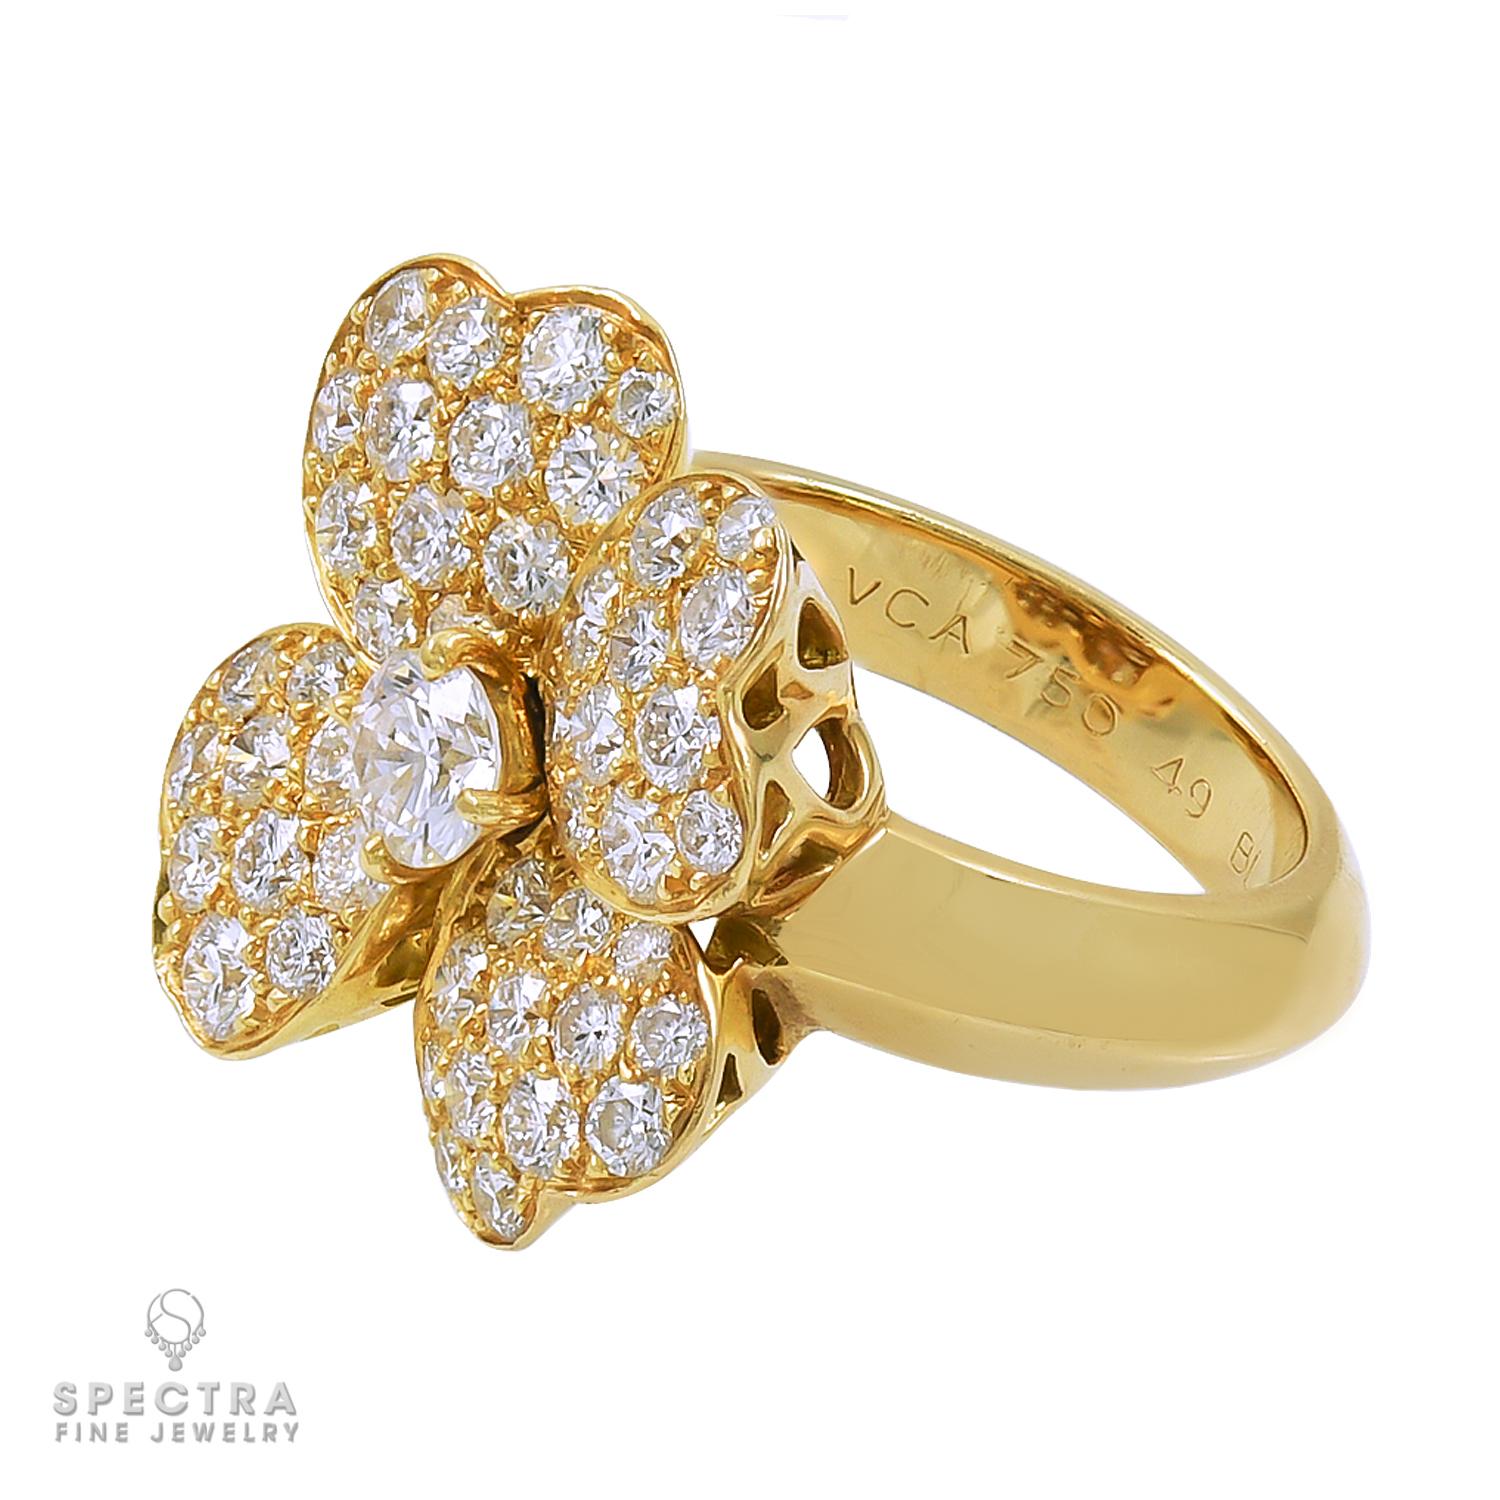 Van Cleef & Arpels 'Cosmos' ring (small model) of 18k yellow gold and diamonds containing approximately 1.70 carats, D-E-F color, VVS clarity. 
Gross weight: 9.55 gram
Size 49 (US 4.5)
Comes with the original box and valuation paper from Van Cleef &